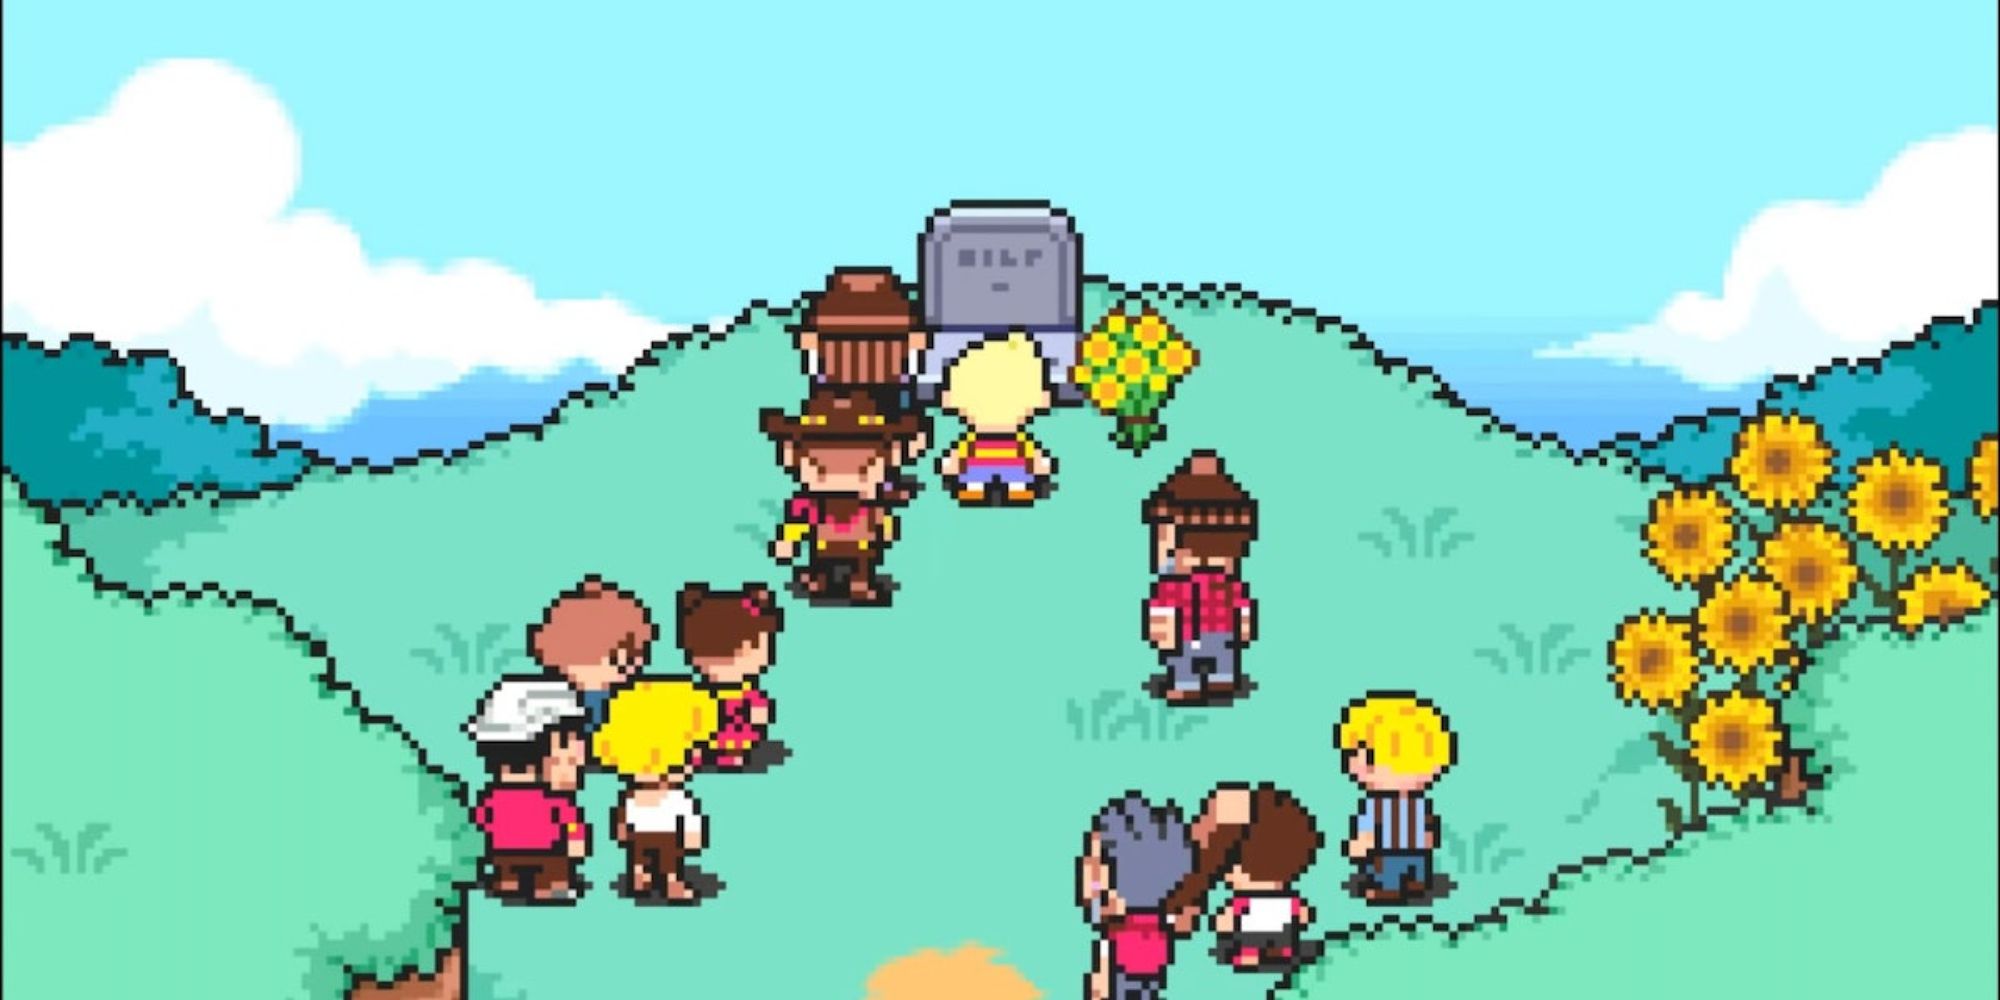 Lucas and others gathered at a tomb in Mother 3